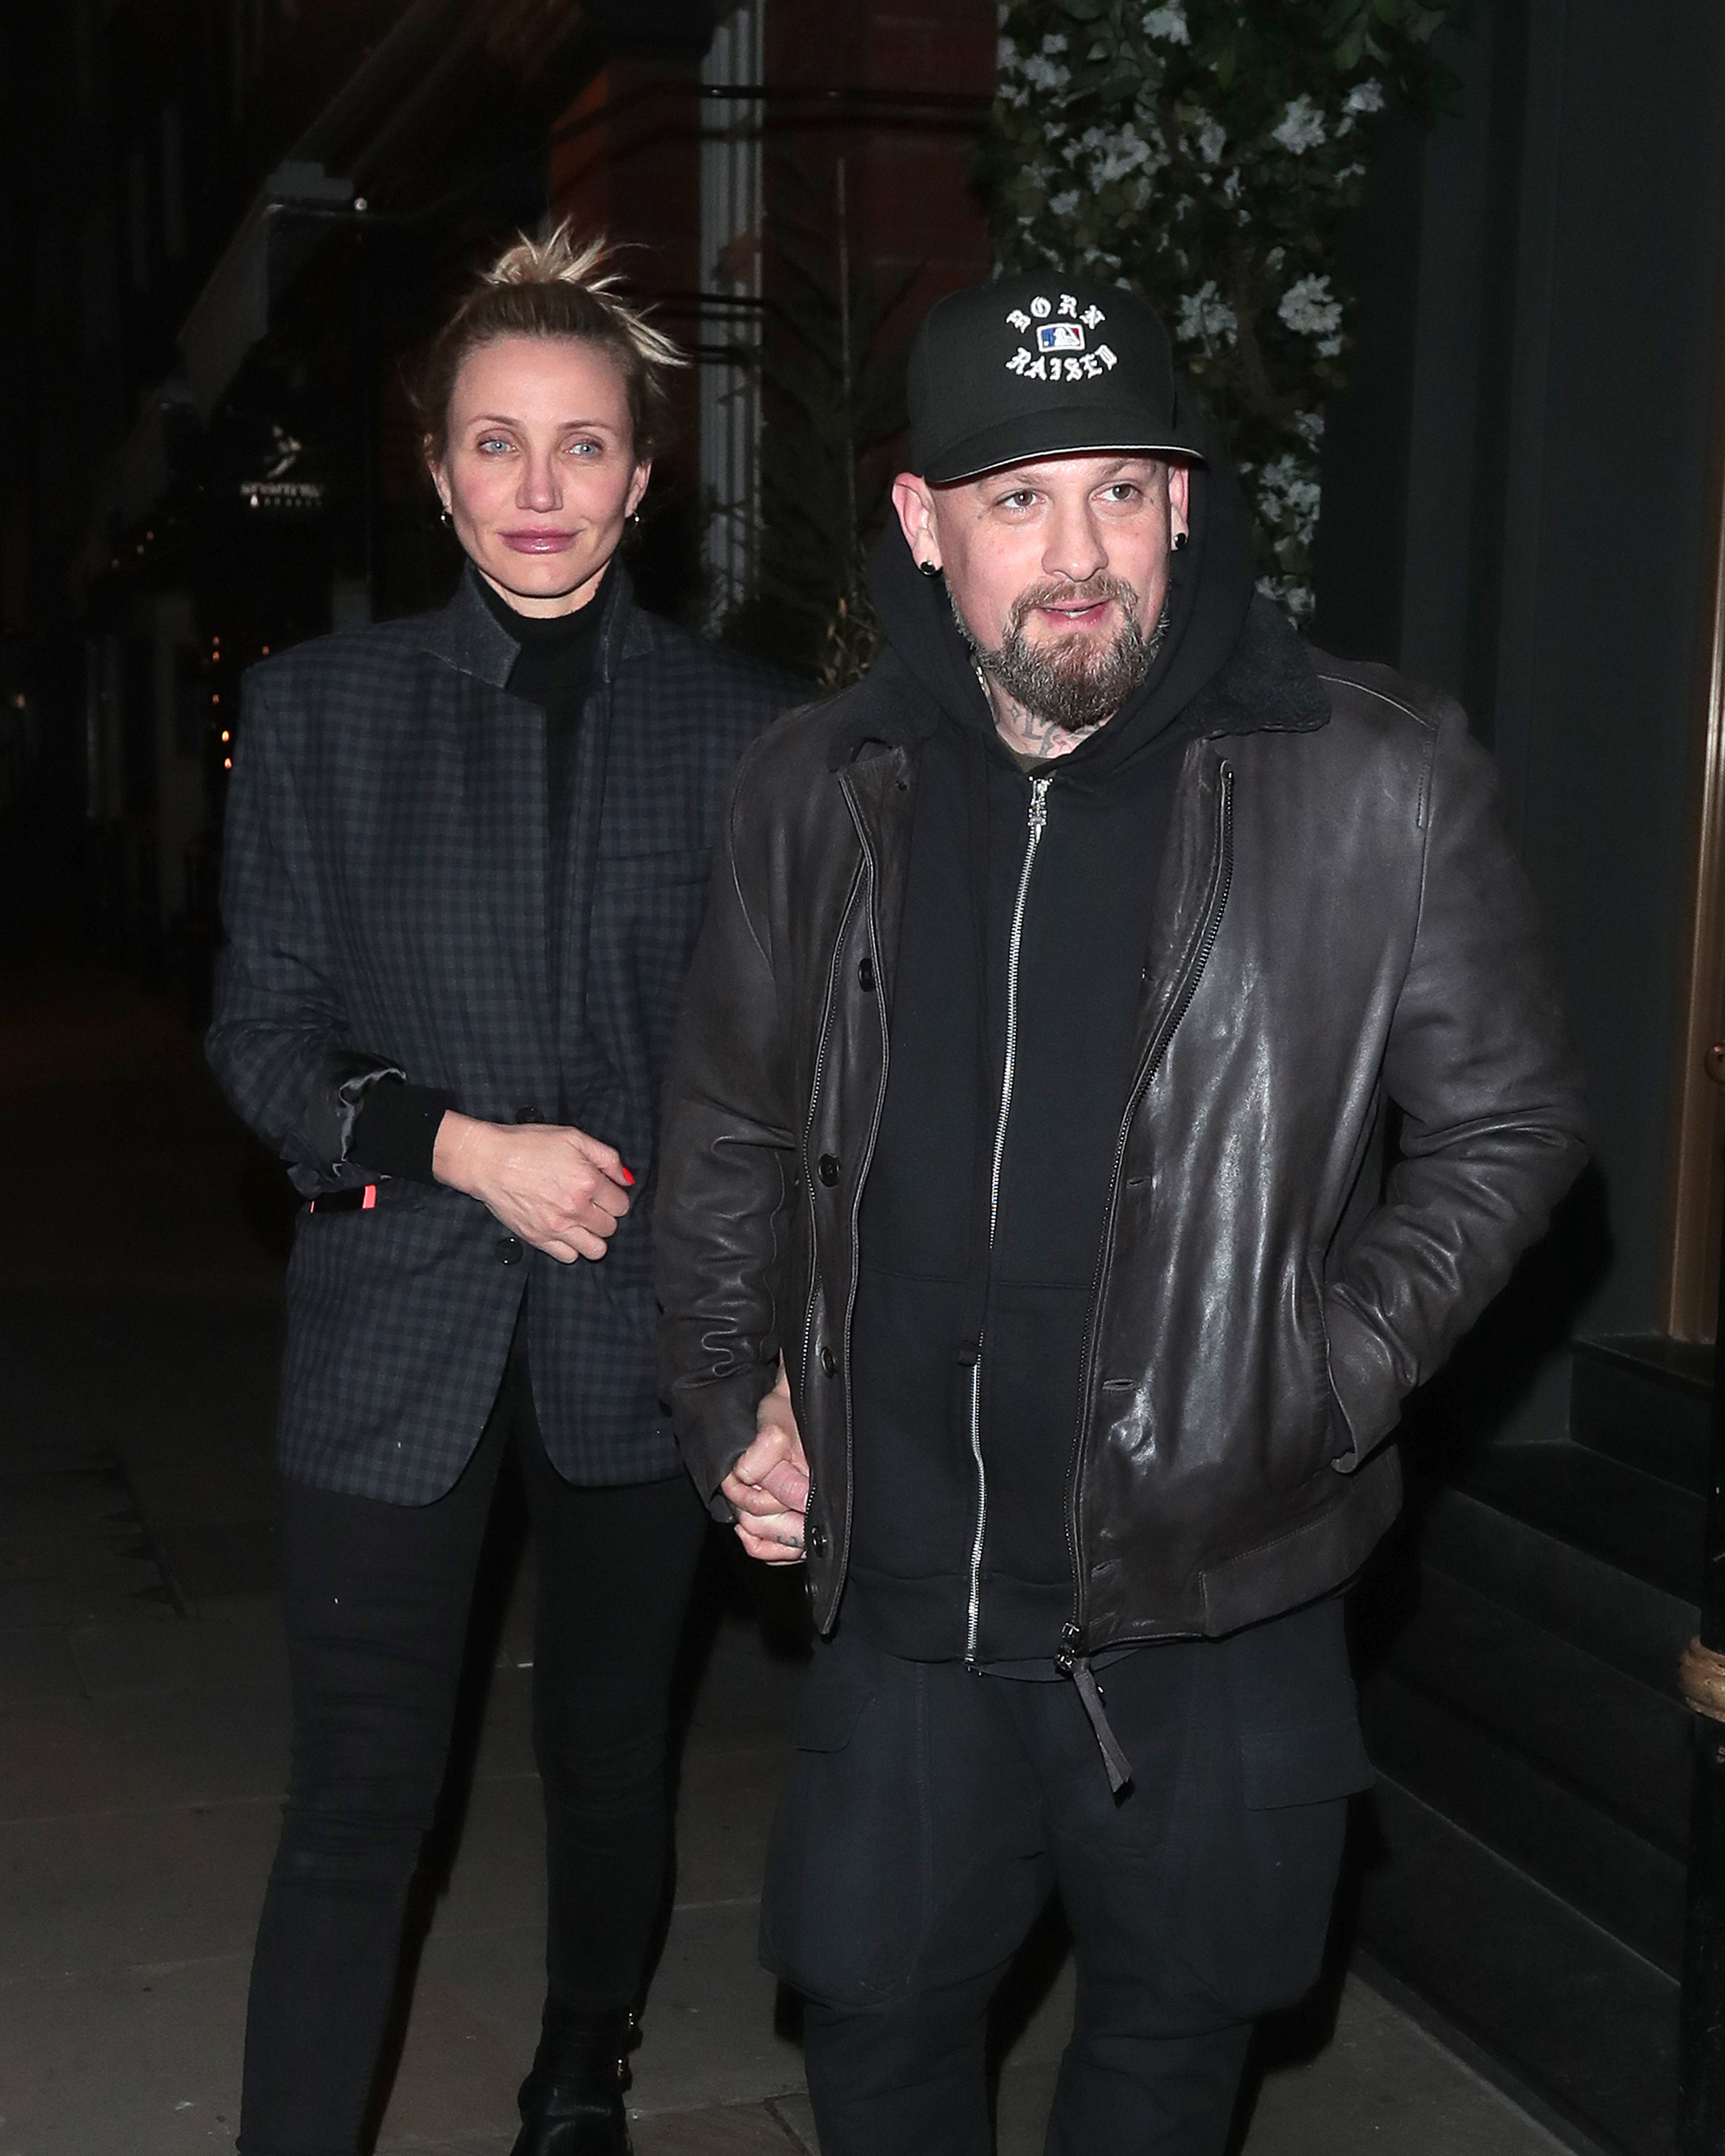 Cameron Diaz and Benji Madden spotted in London, England on December 2, 2022 | Source: Getty Images